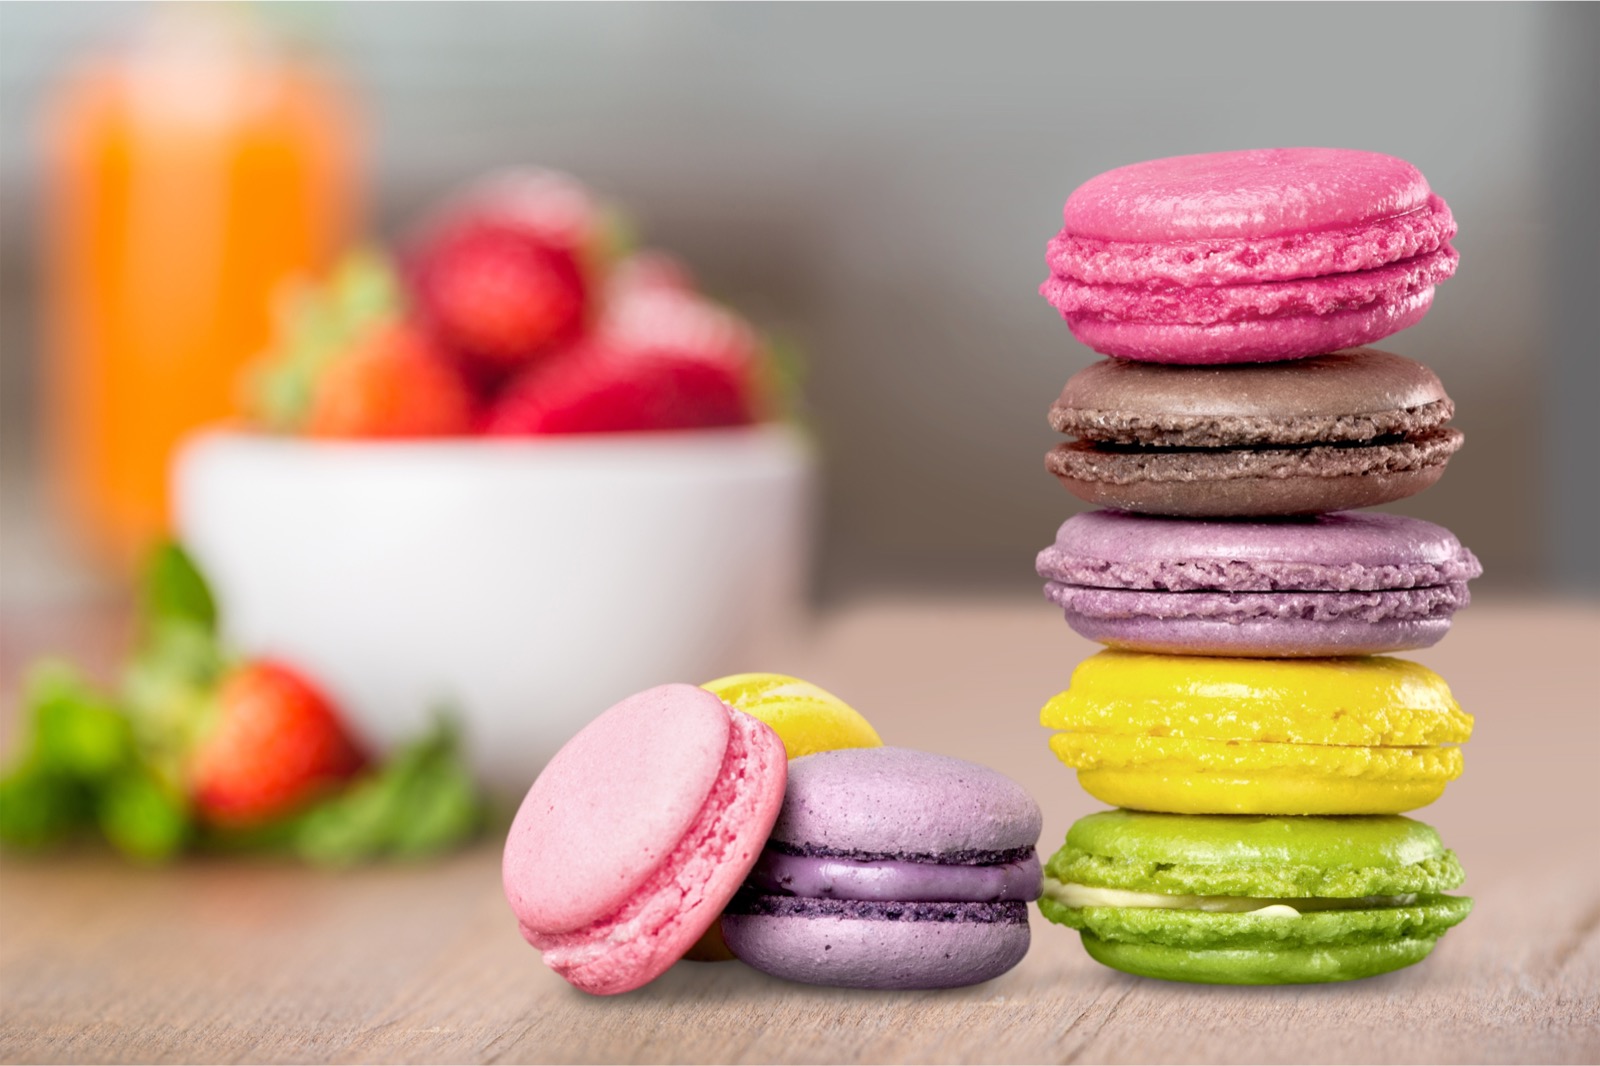 Do You Actually Prefer American or French Desserts? Macarons